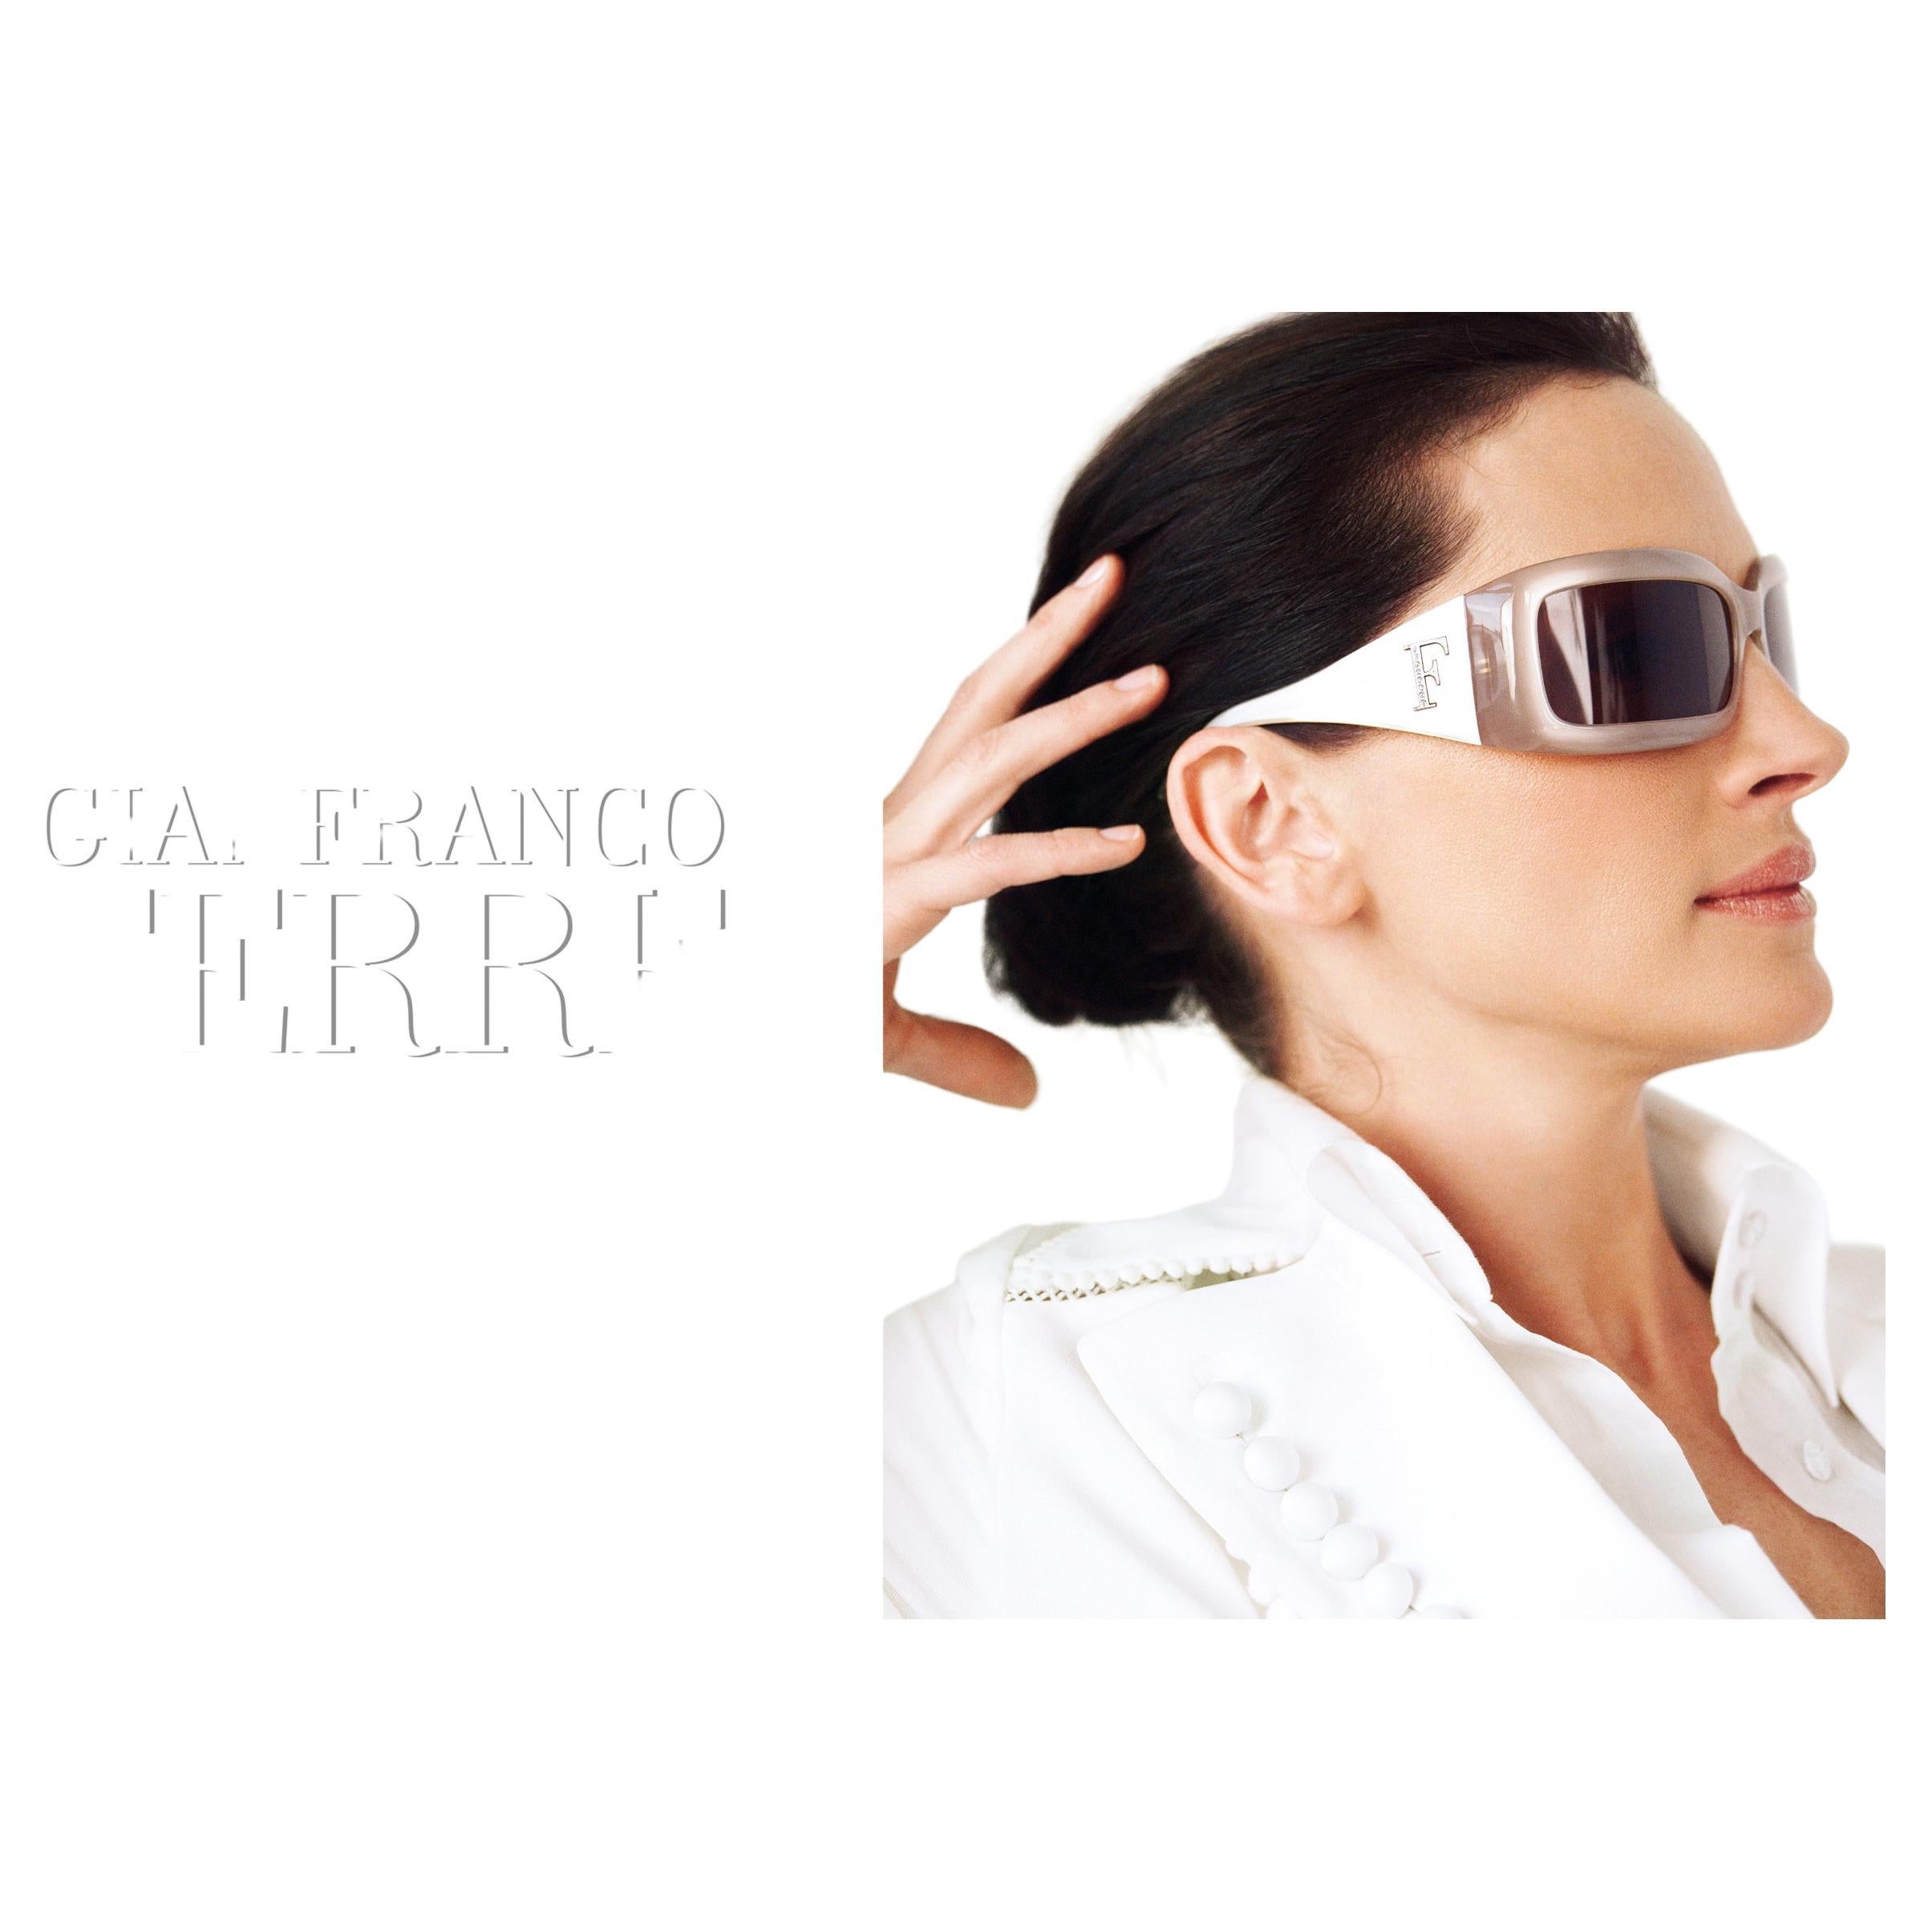 - Gianfranco Ferrè maxi sunglasses
- Sold by Gold Palms Vintage
- Spring/Summer 2006
- Pearl beige maxi sunglasses
- Maxi Swarovski logo on both temples
- Campaign piece, famously worn by Julia Roberts
- Comes with original frame